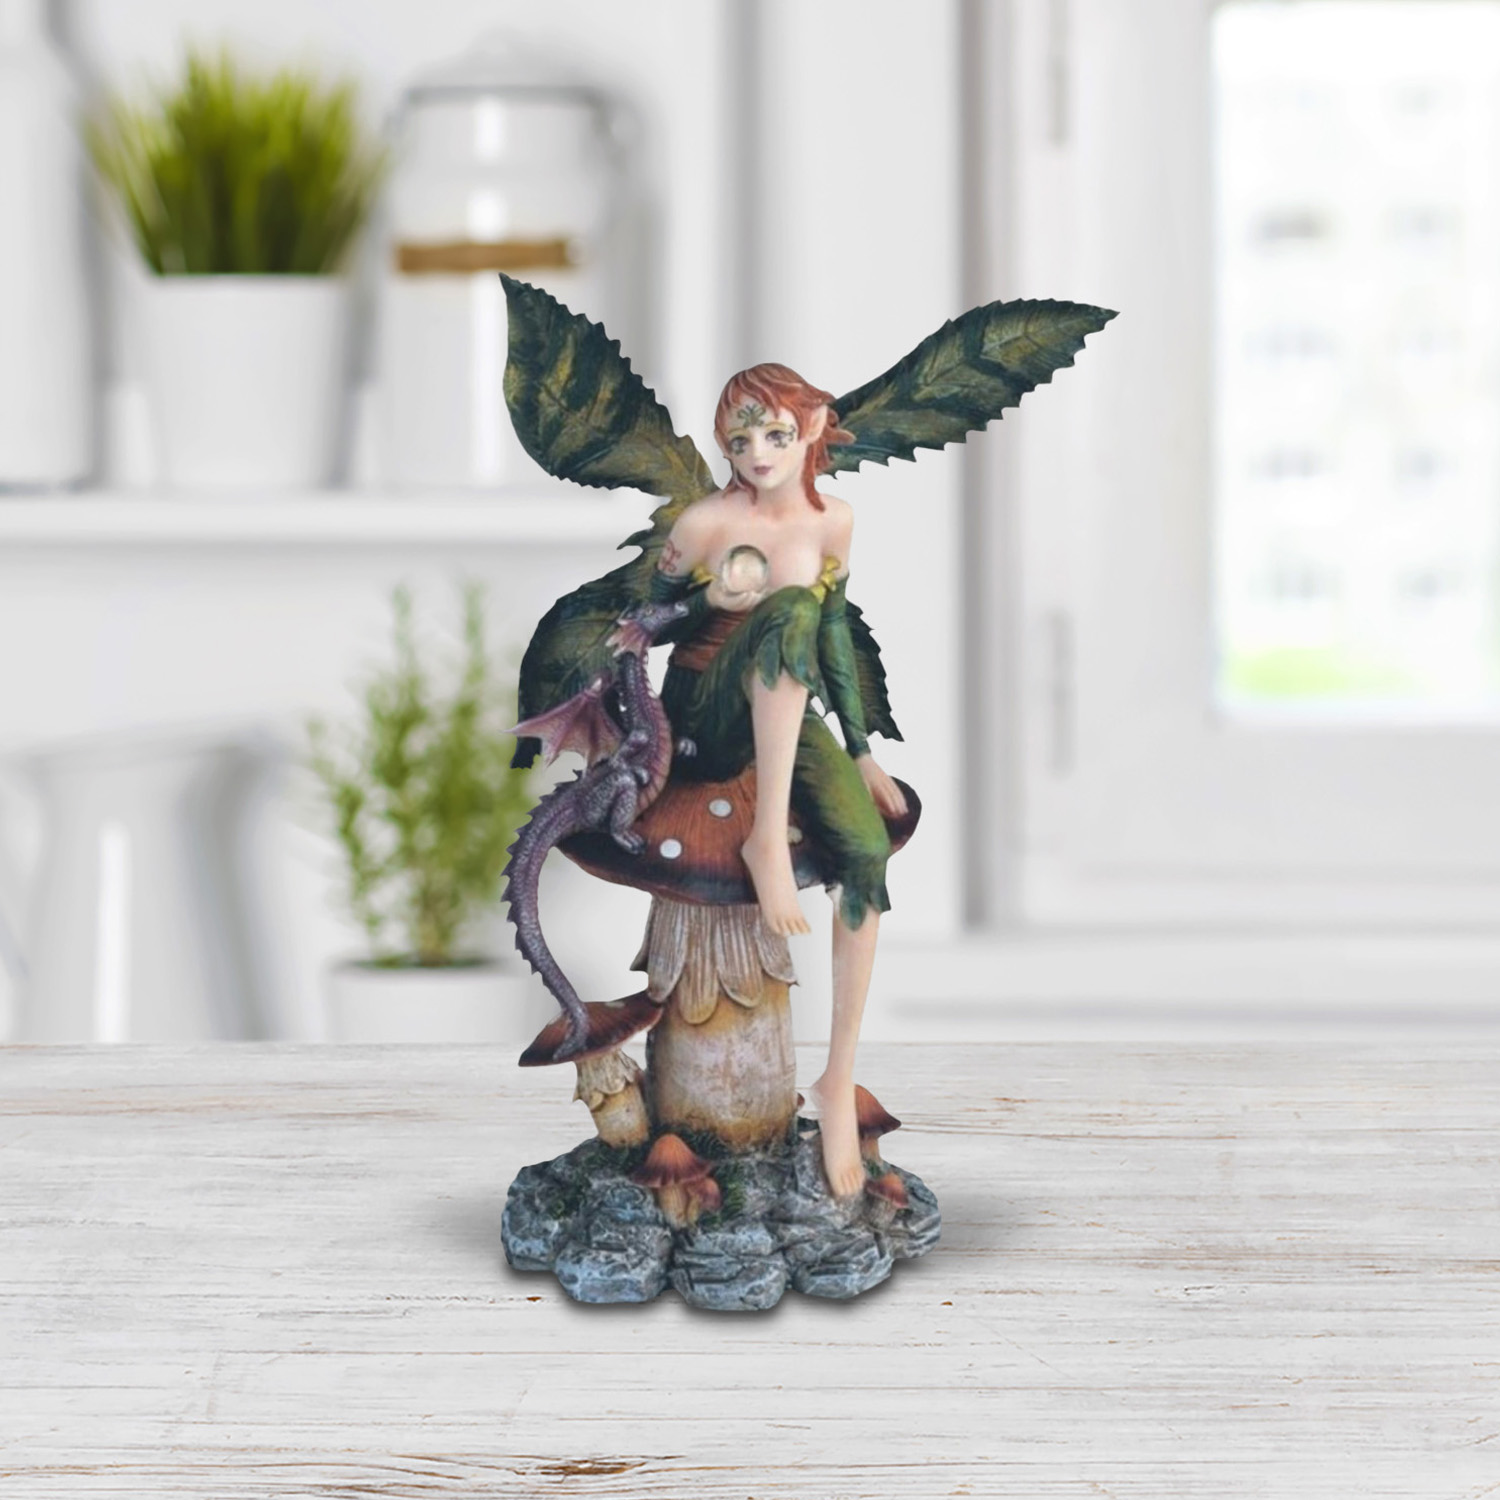 

9"h Green Fairy With Purple Baby Dragon Sitting On Mushroom Figurine Statue Home/room Decor And Perfect Gift Ideas For House Warming, Holidays And Birthdays Great Collectible Addition